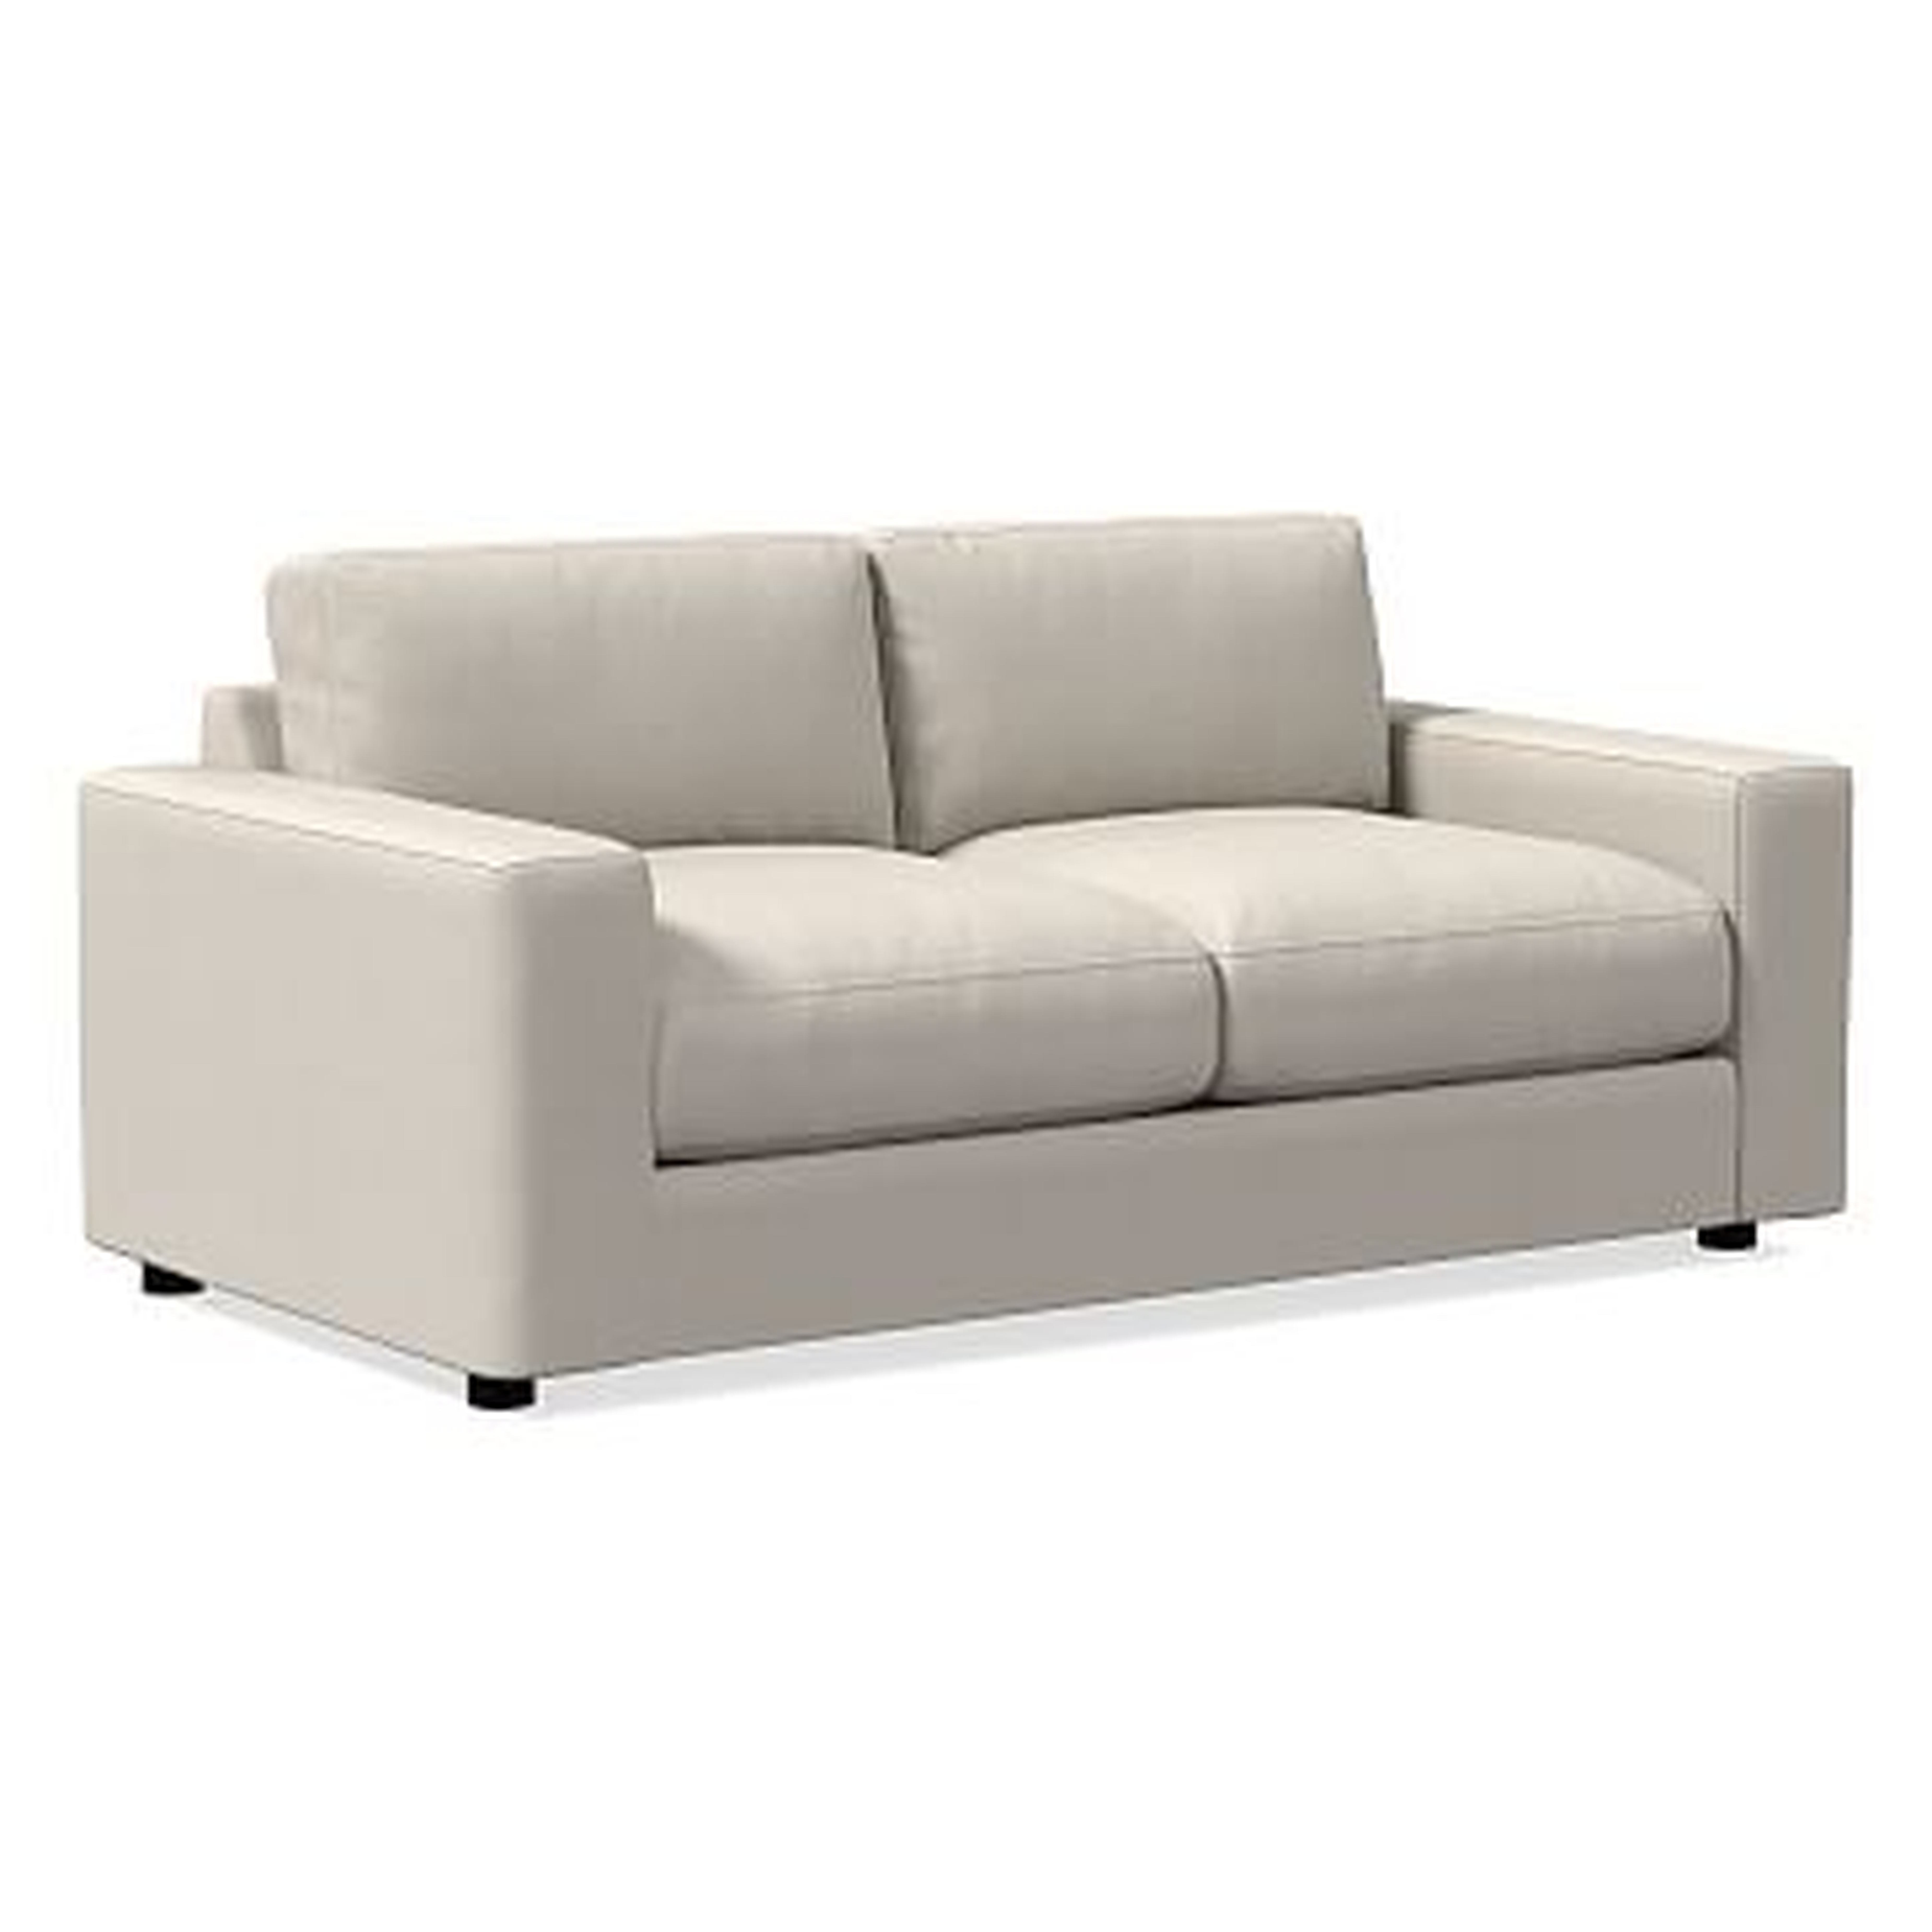 Urban 73" Sofa, Poly, Performance Yarn Dyed Linen Weave, Alabaster - Poly Fill Cushions - West Elm